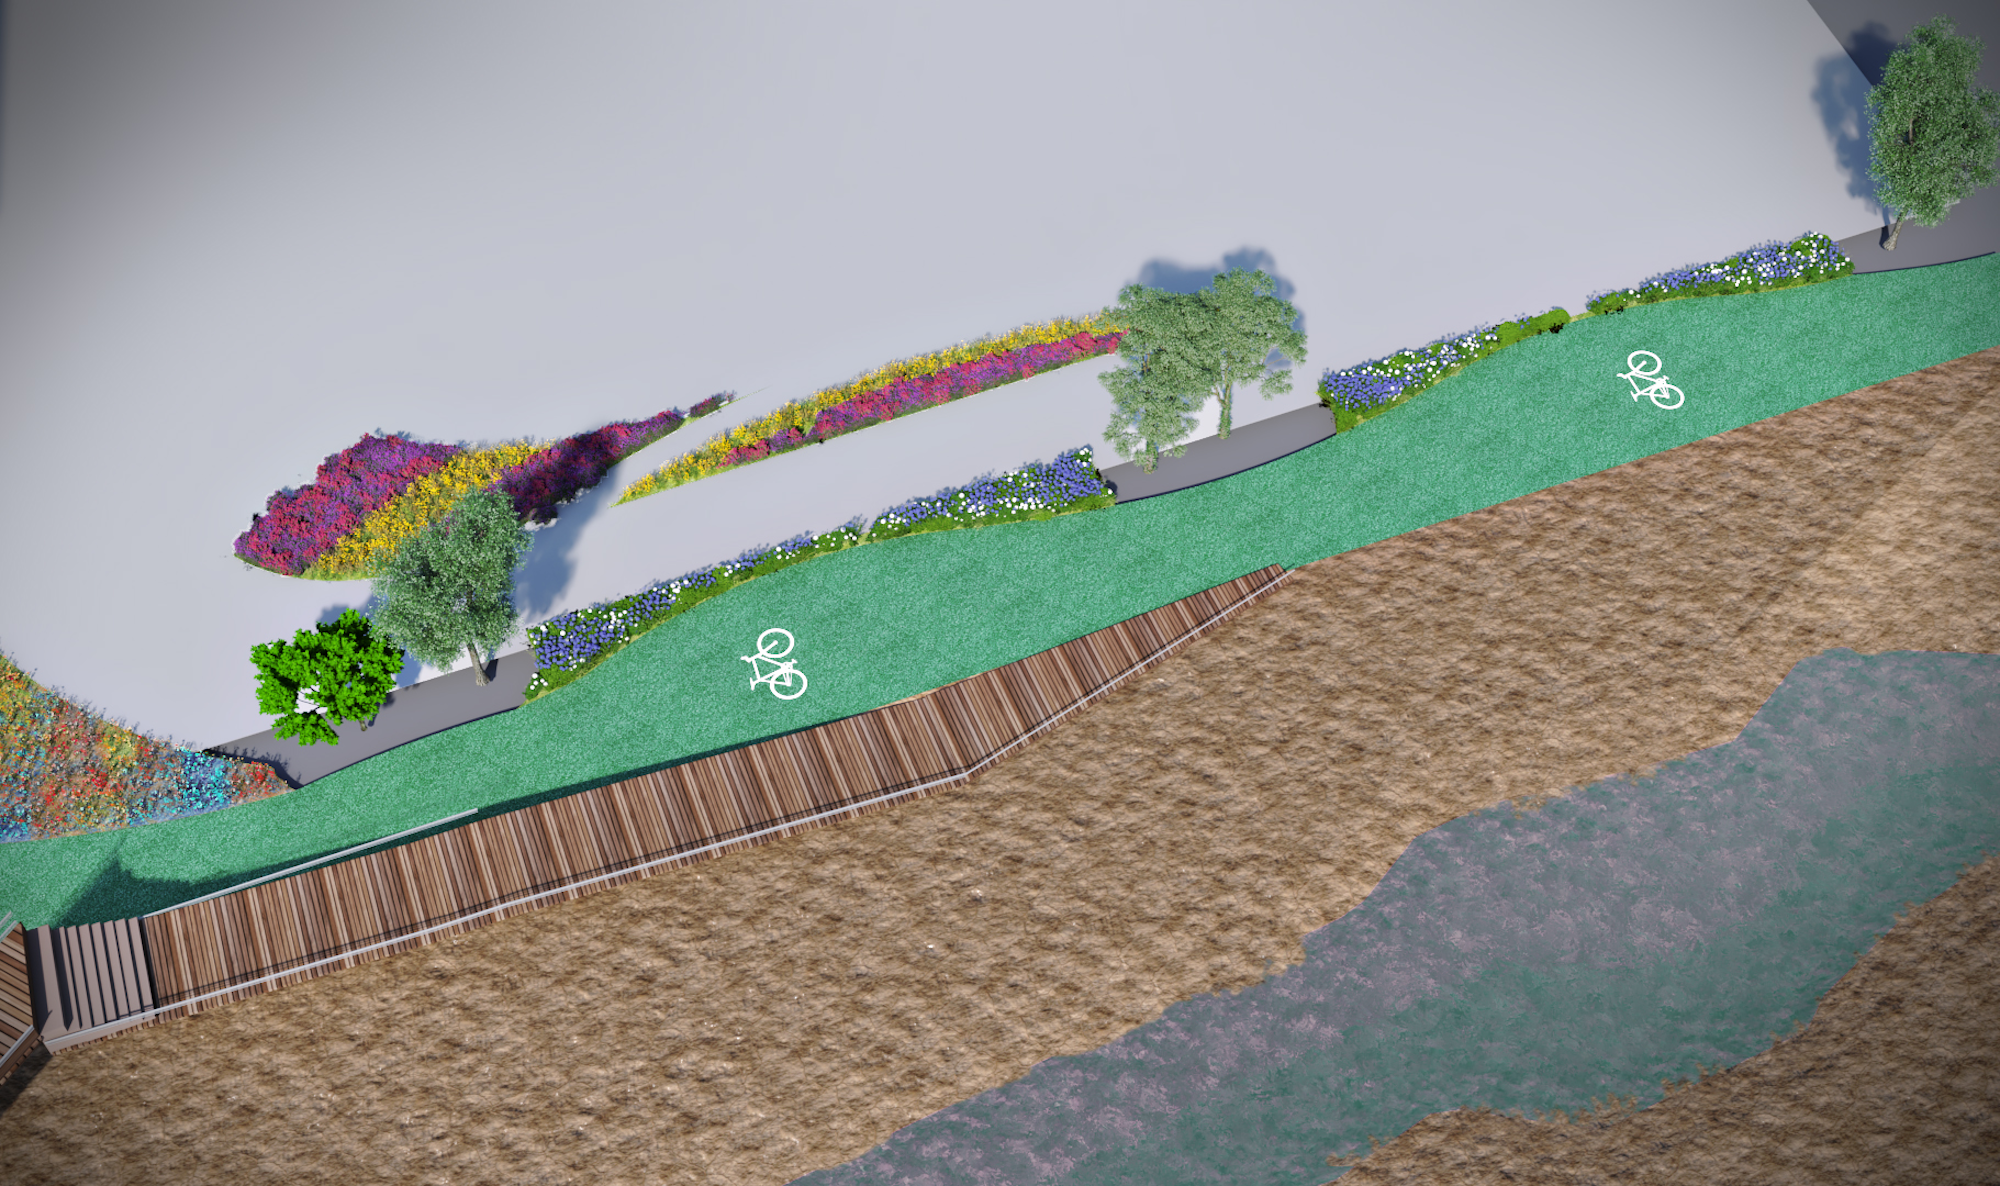 3D render of a landscaped pedestrian area with shrubbery, trees and a cycle path